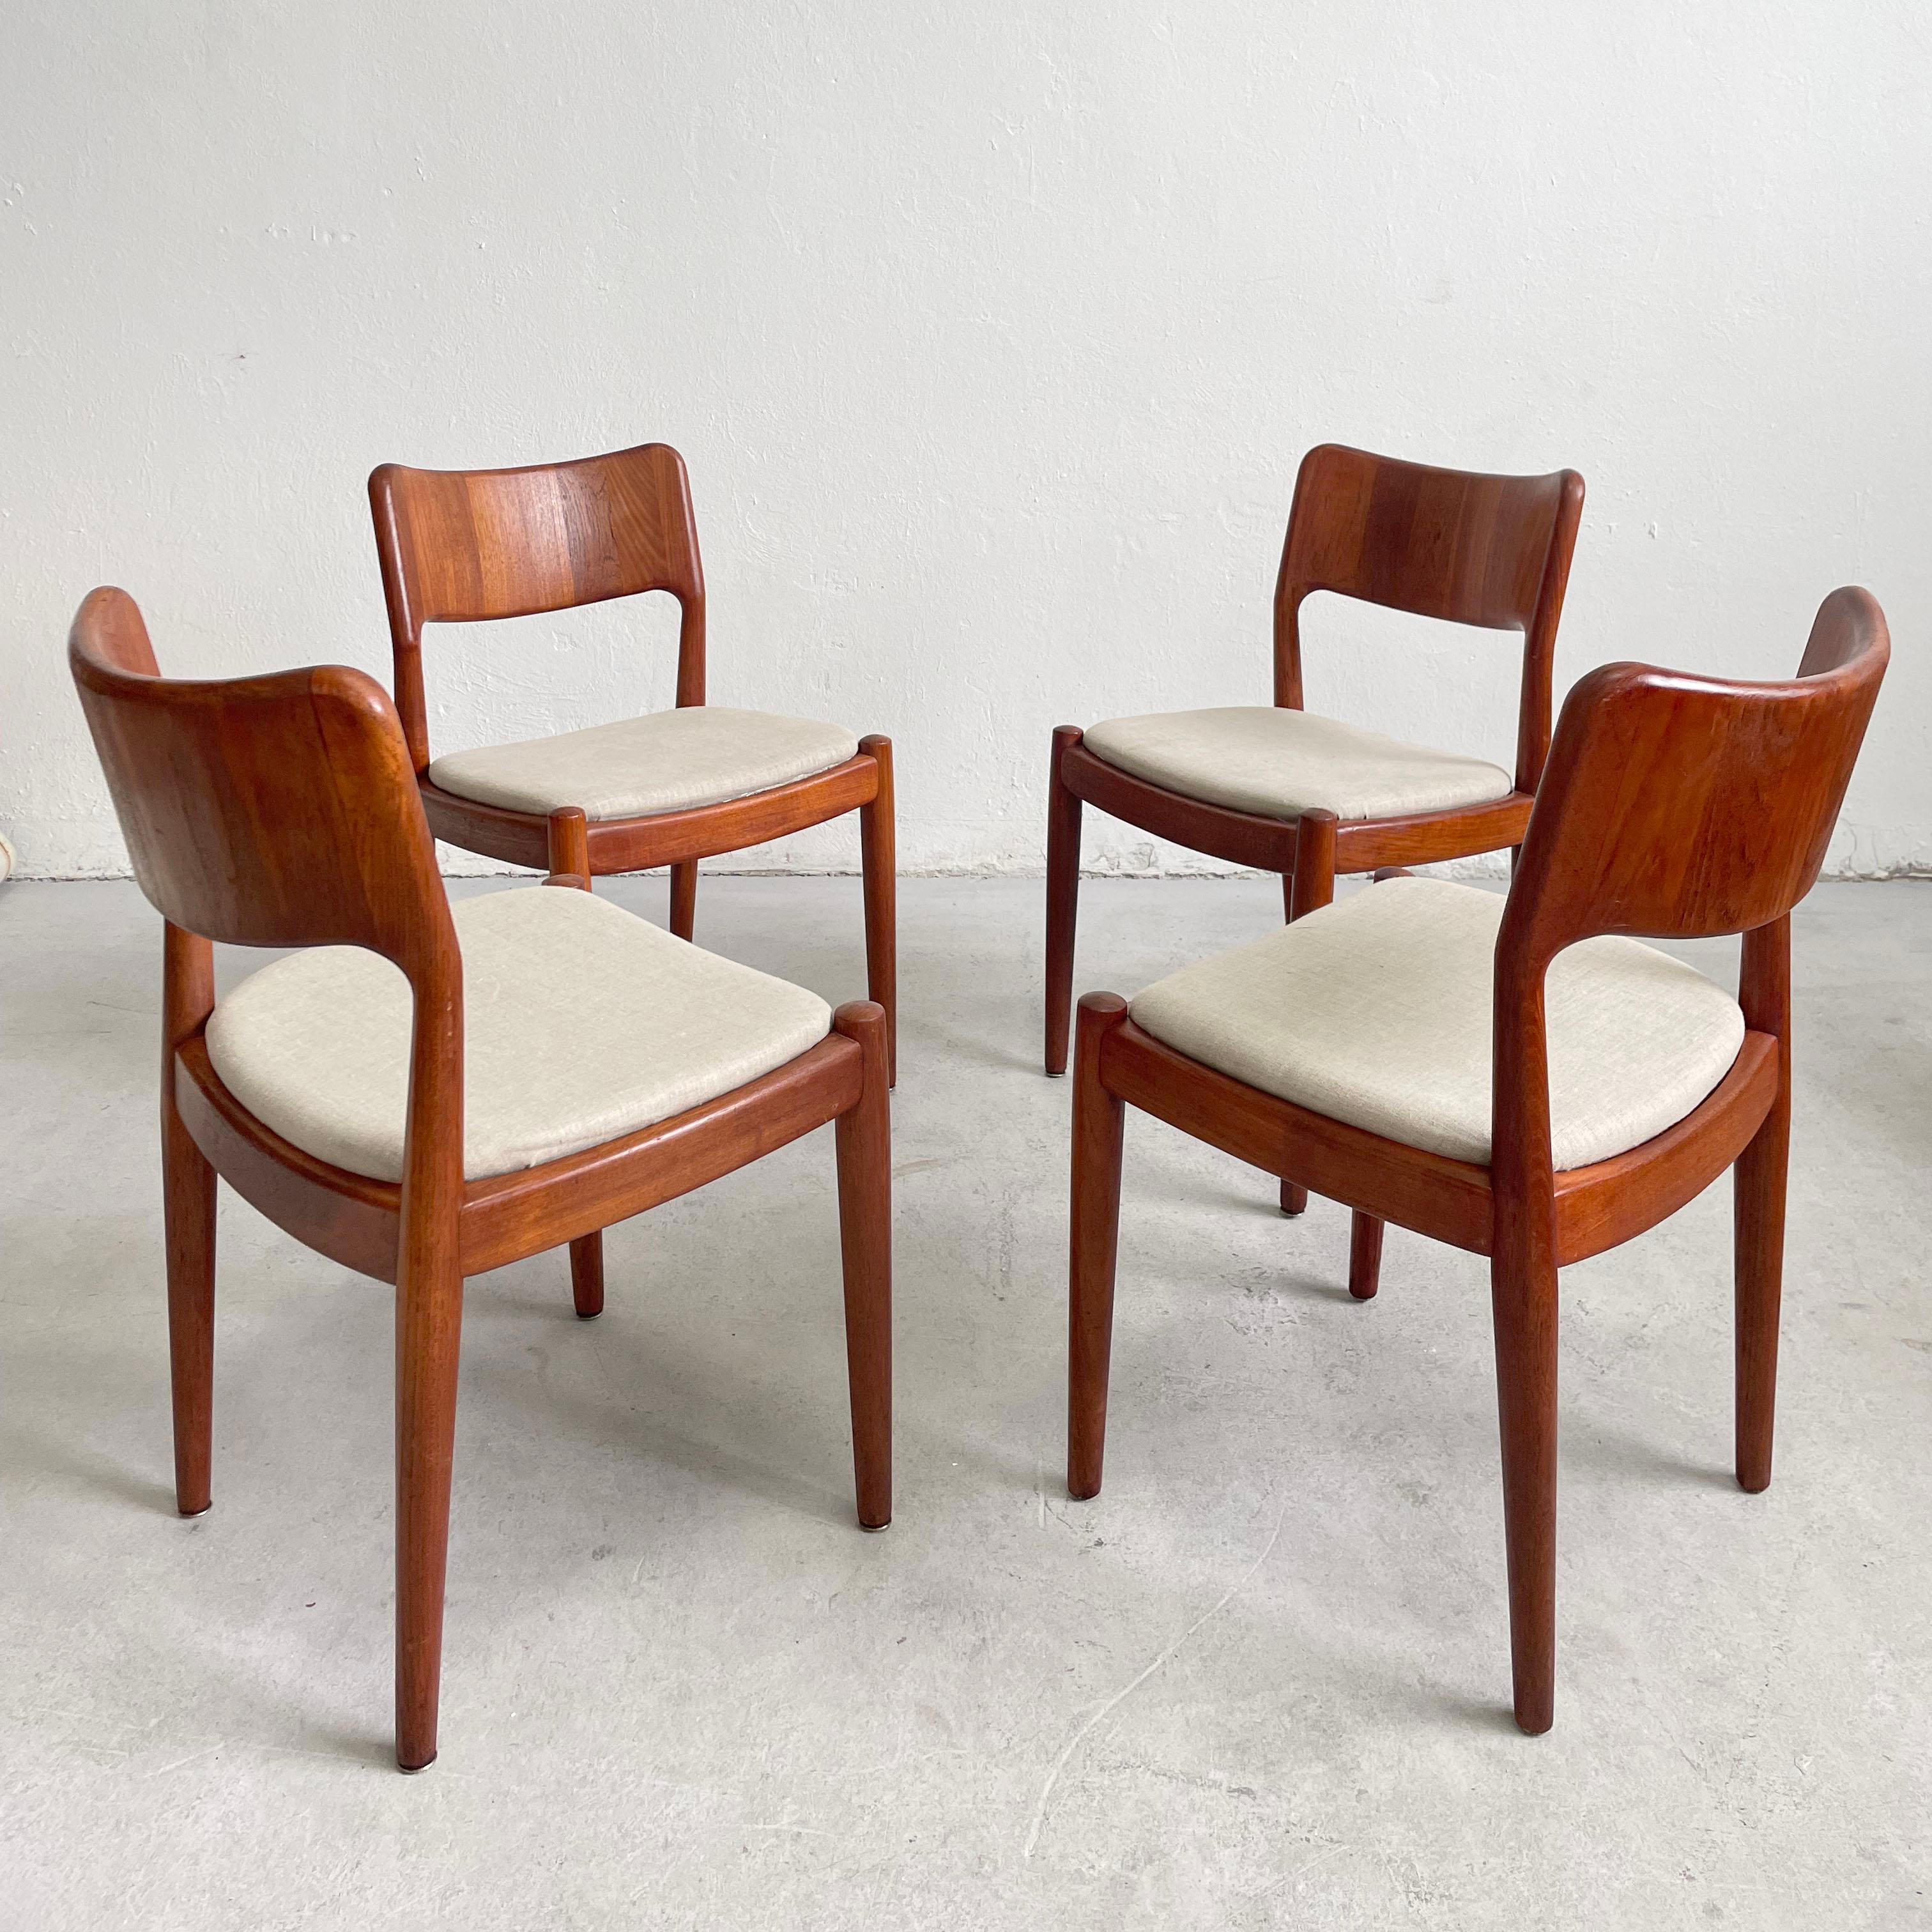 Set of four Danish modern chairs manufactured by the Danish manufacturer Glostrup Møbelfabrik during the 1960s. 

The chairs are made of solid teak in a warm shade of brown that shows beautiful rich wood grain. The seat is upholstered with a grey